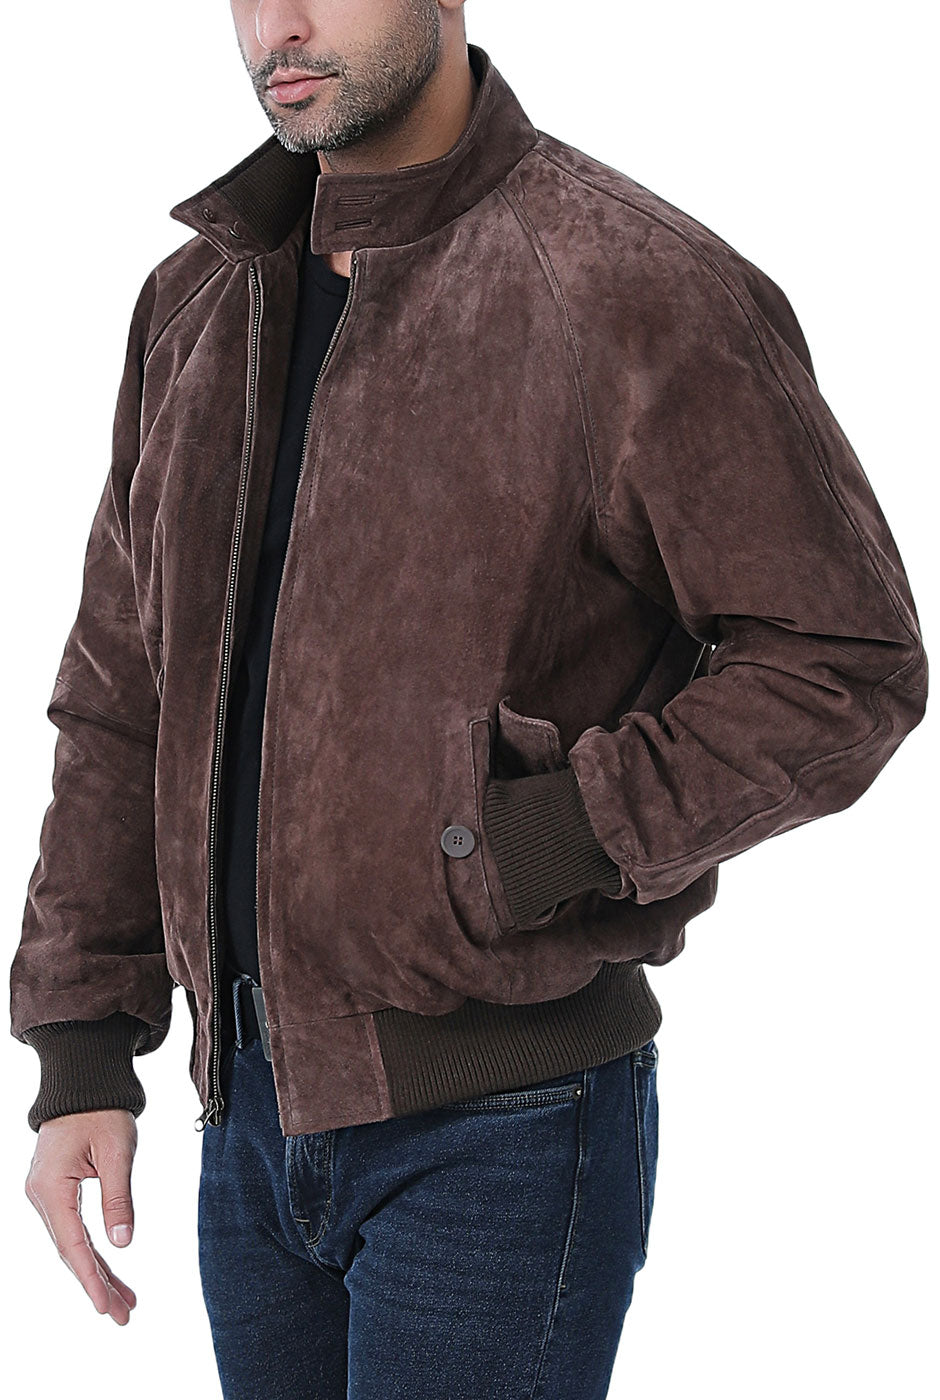 Landing Leathers Monogram Collection Men WWII Suede Leather Bomber Jacket